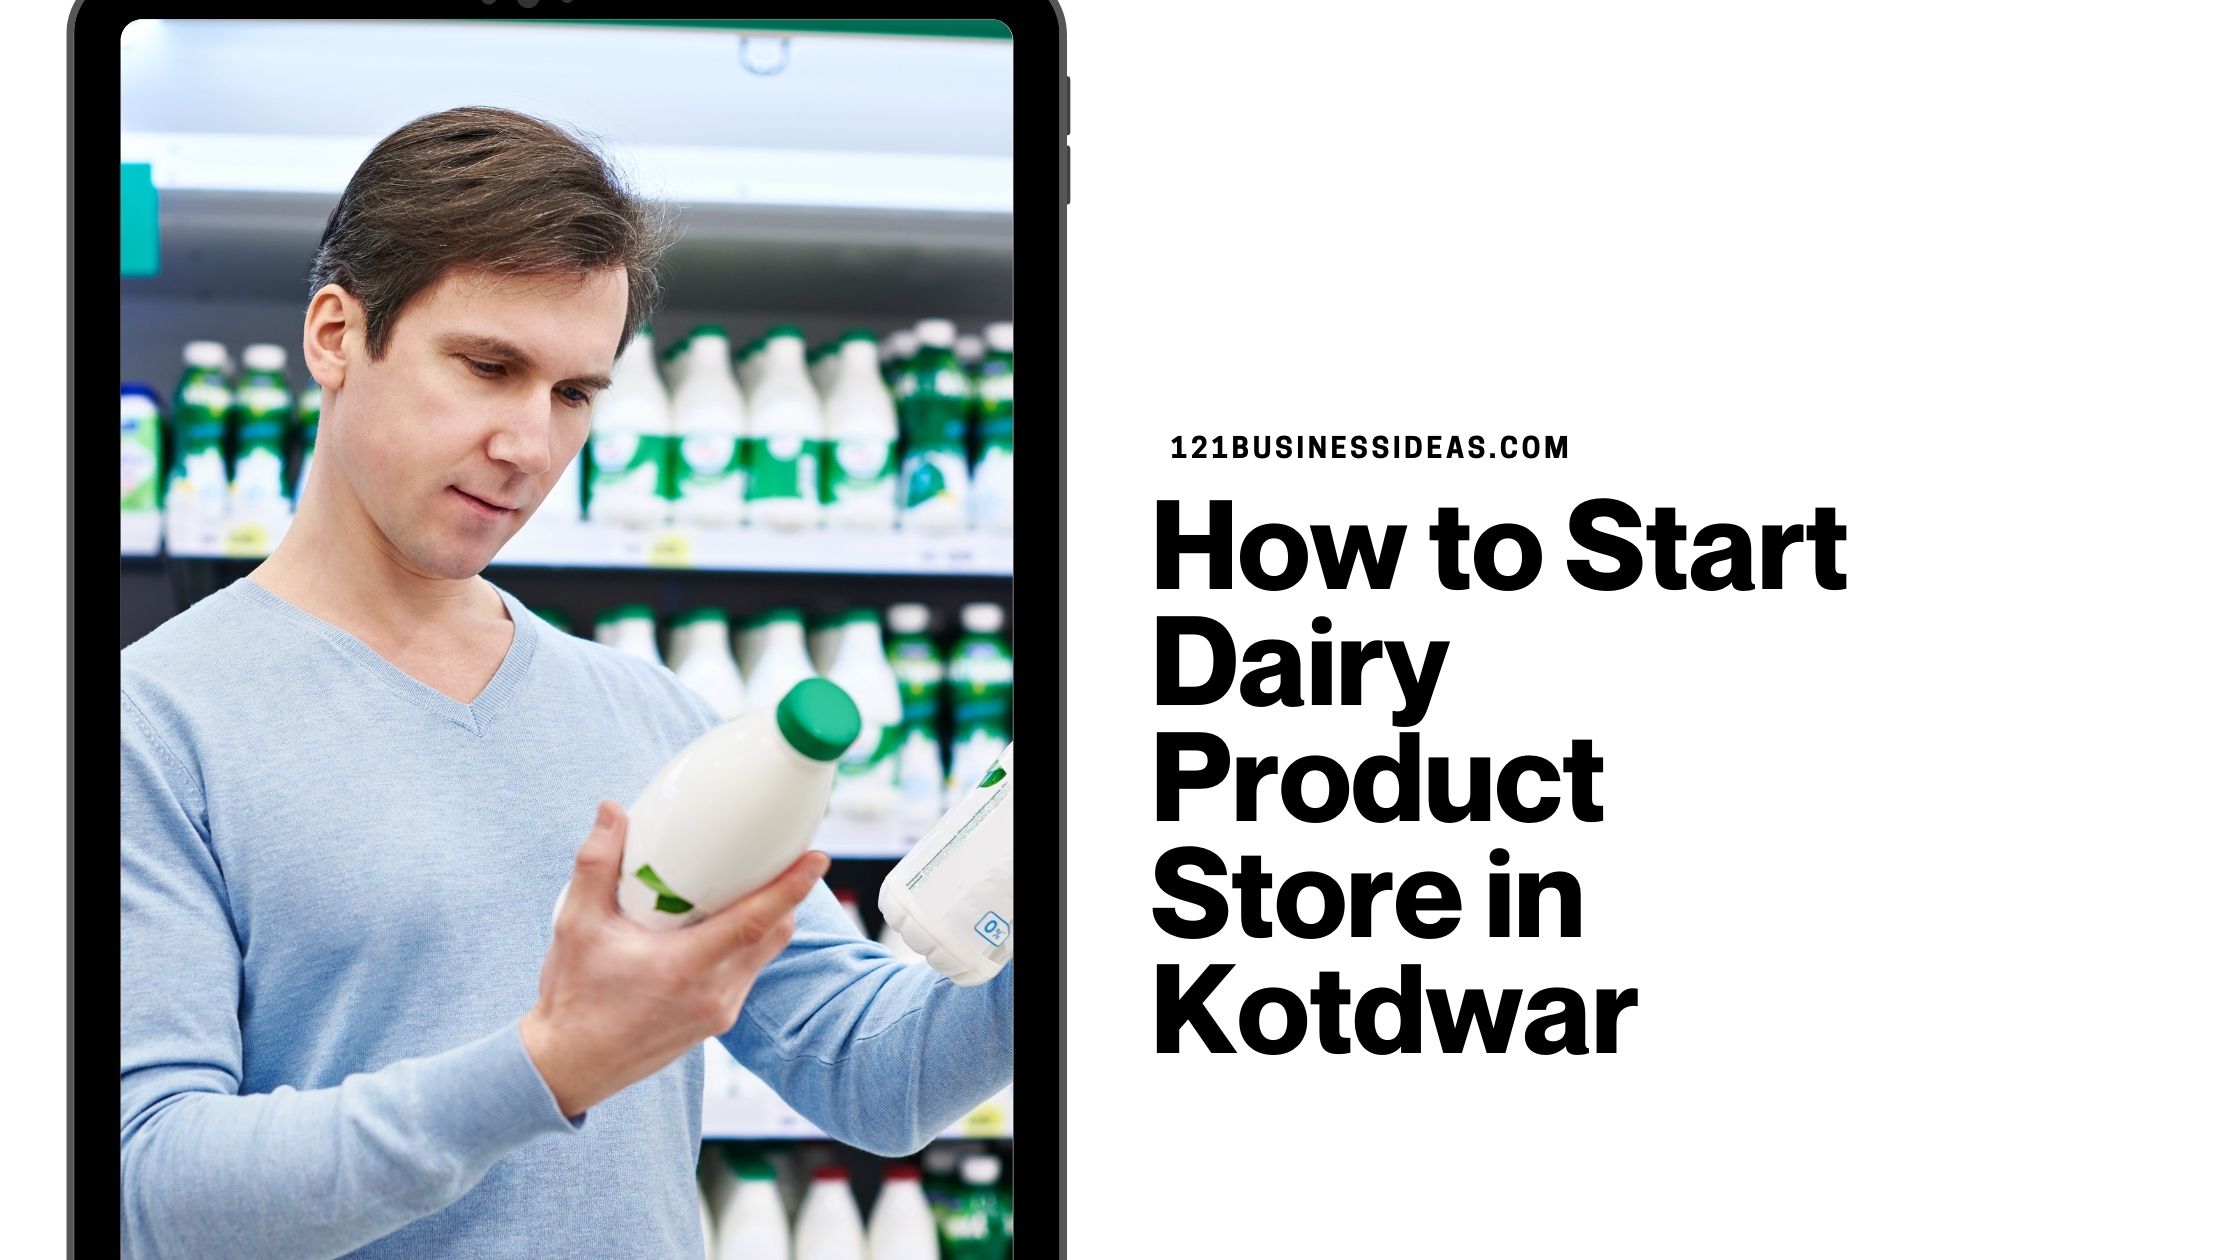 How to Start Dairy Product Store in Kotdwar